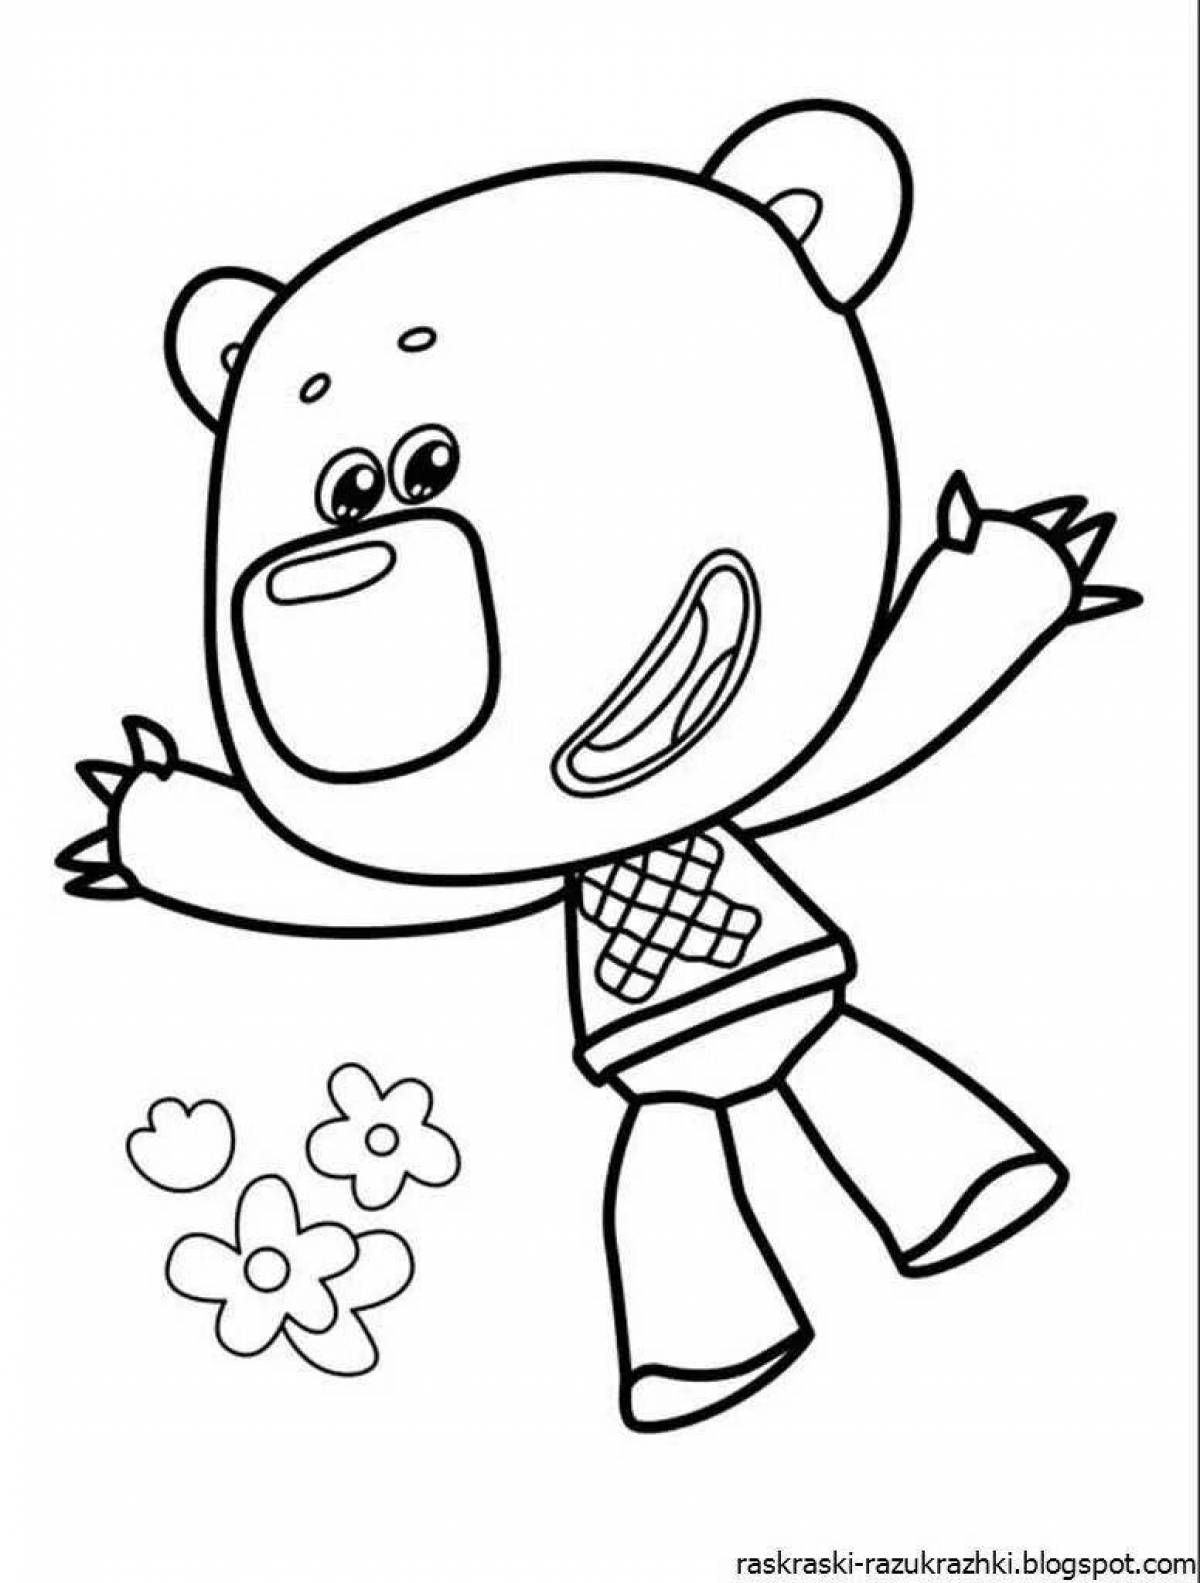 Coloring pages for kids, crazy colors of mimimishka